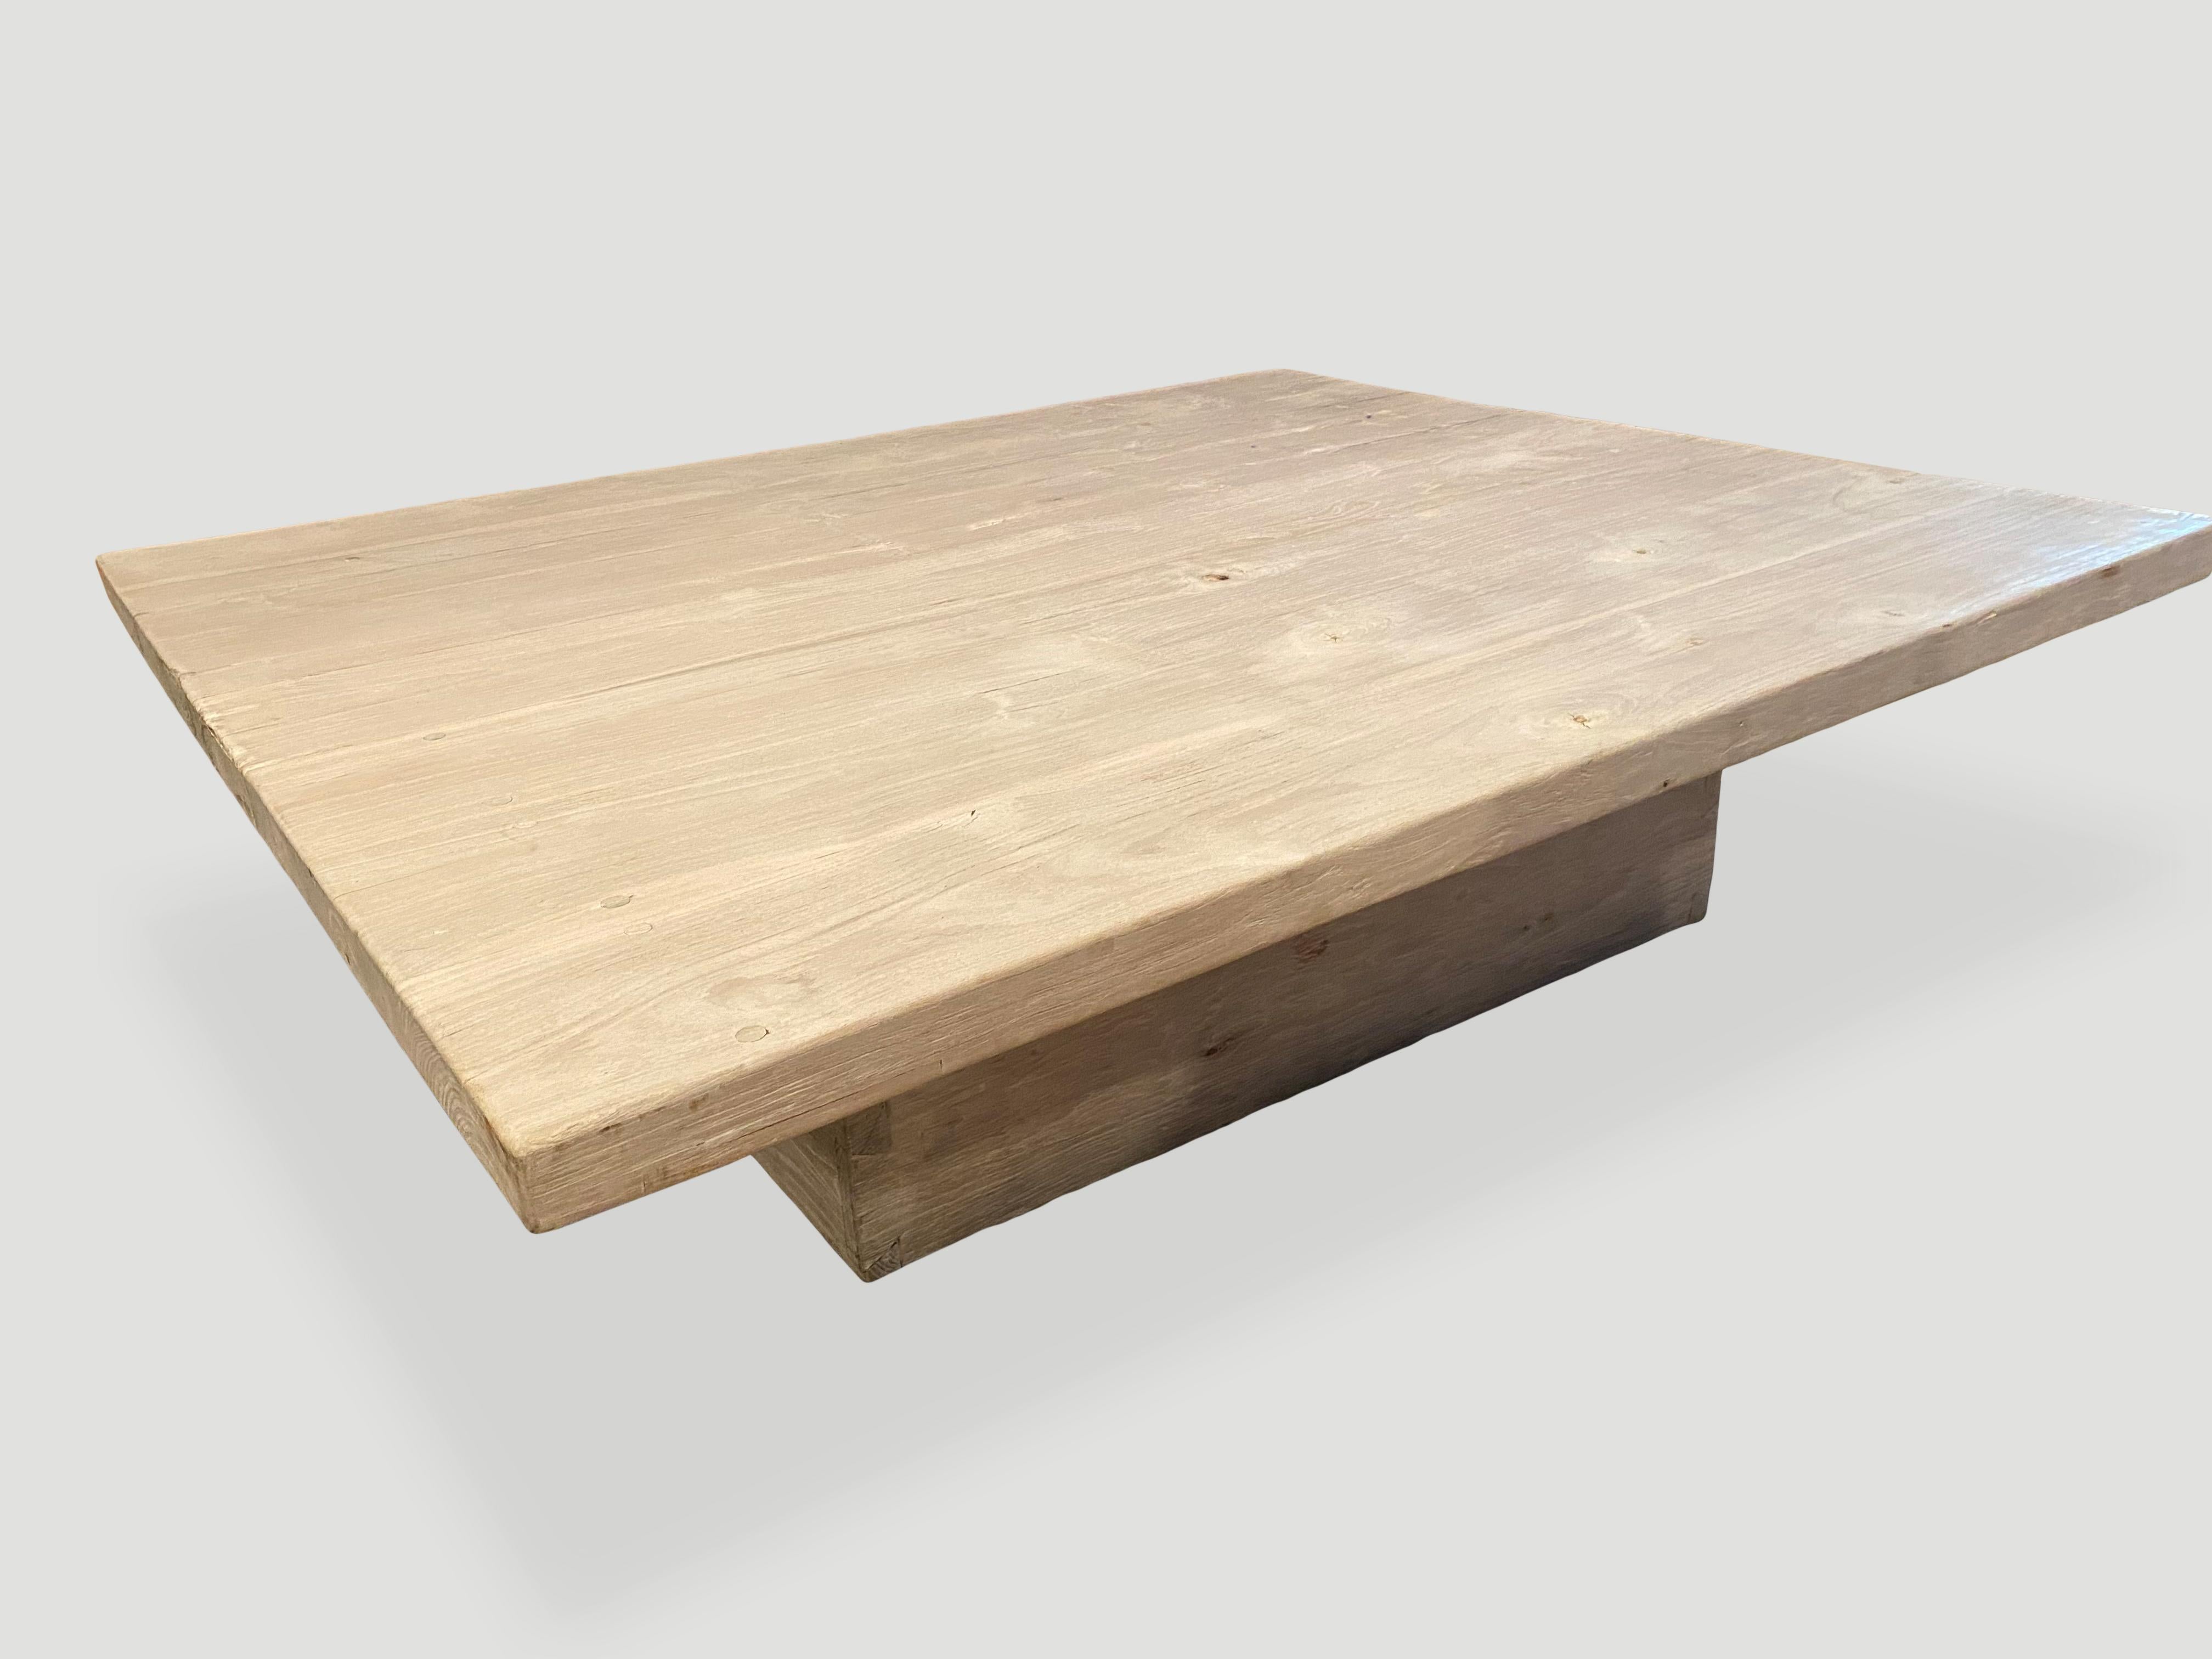 Andrianna Shamaris Signature St. Barts Teak Wood Coffee Table In Excellent Condition For Sale In New York, NY